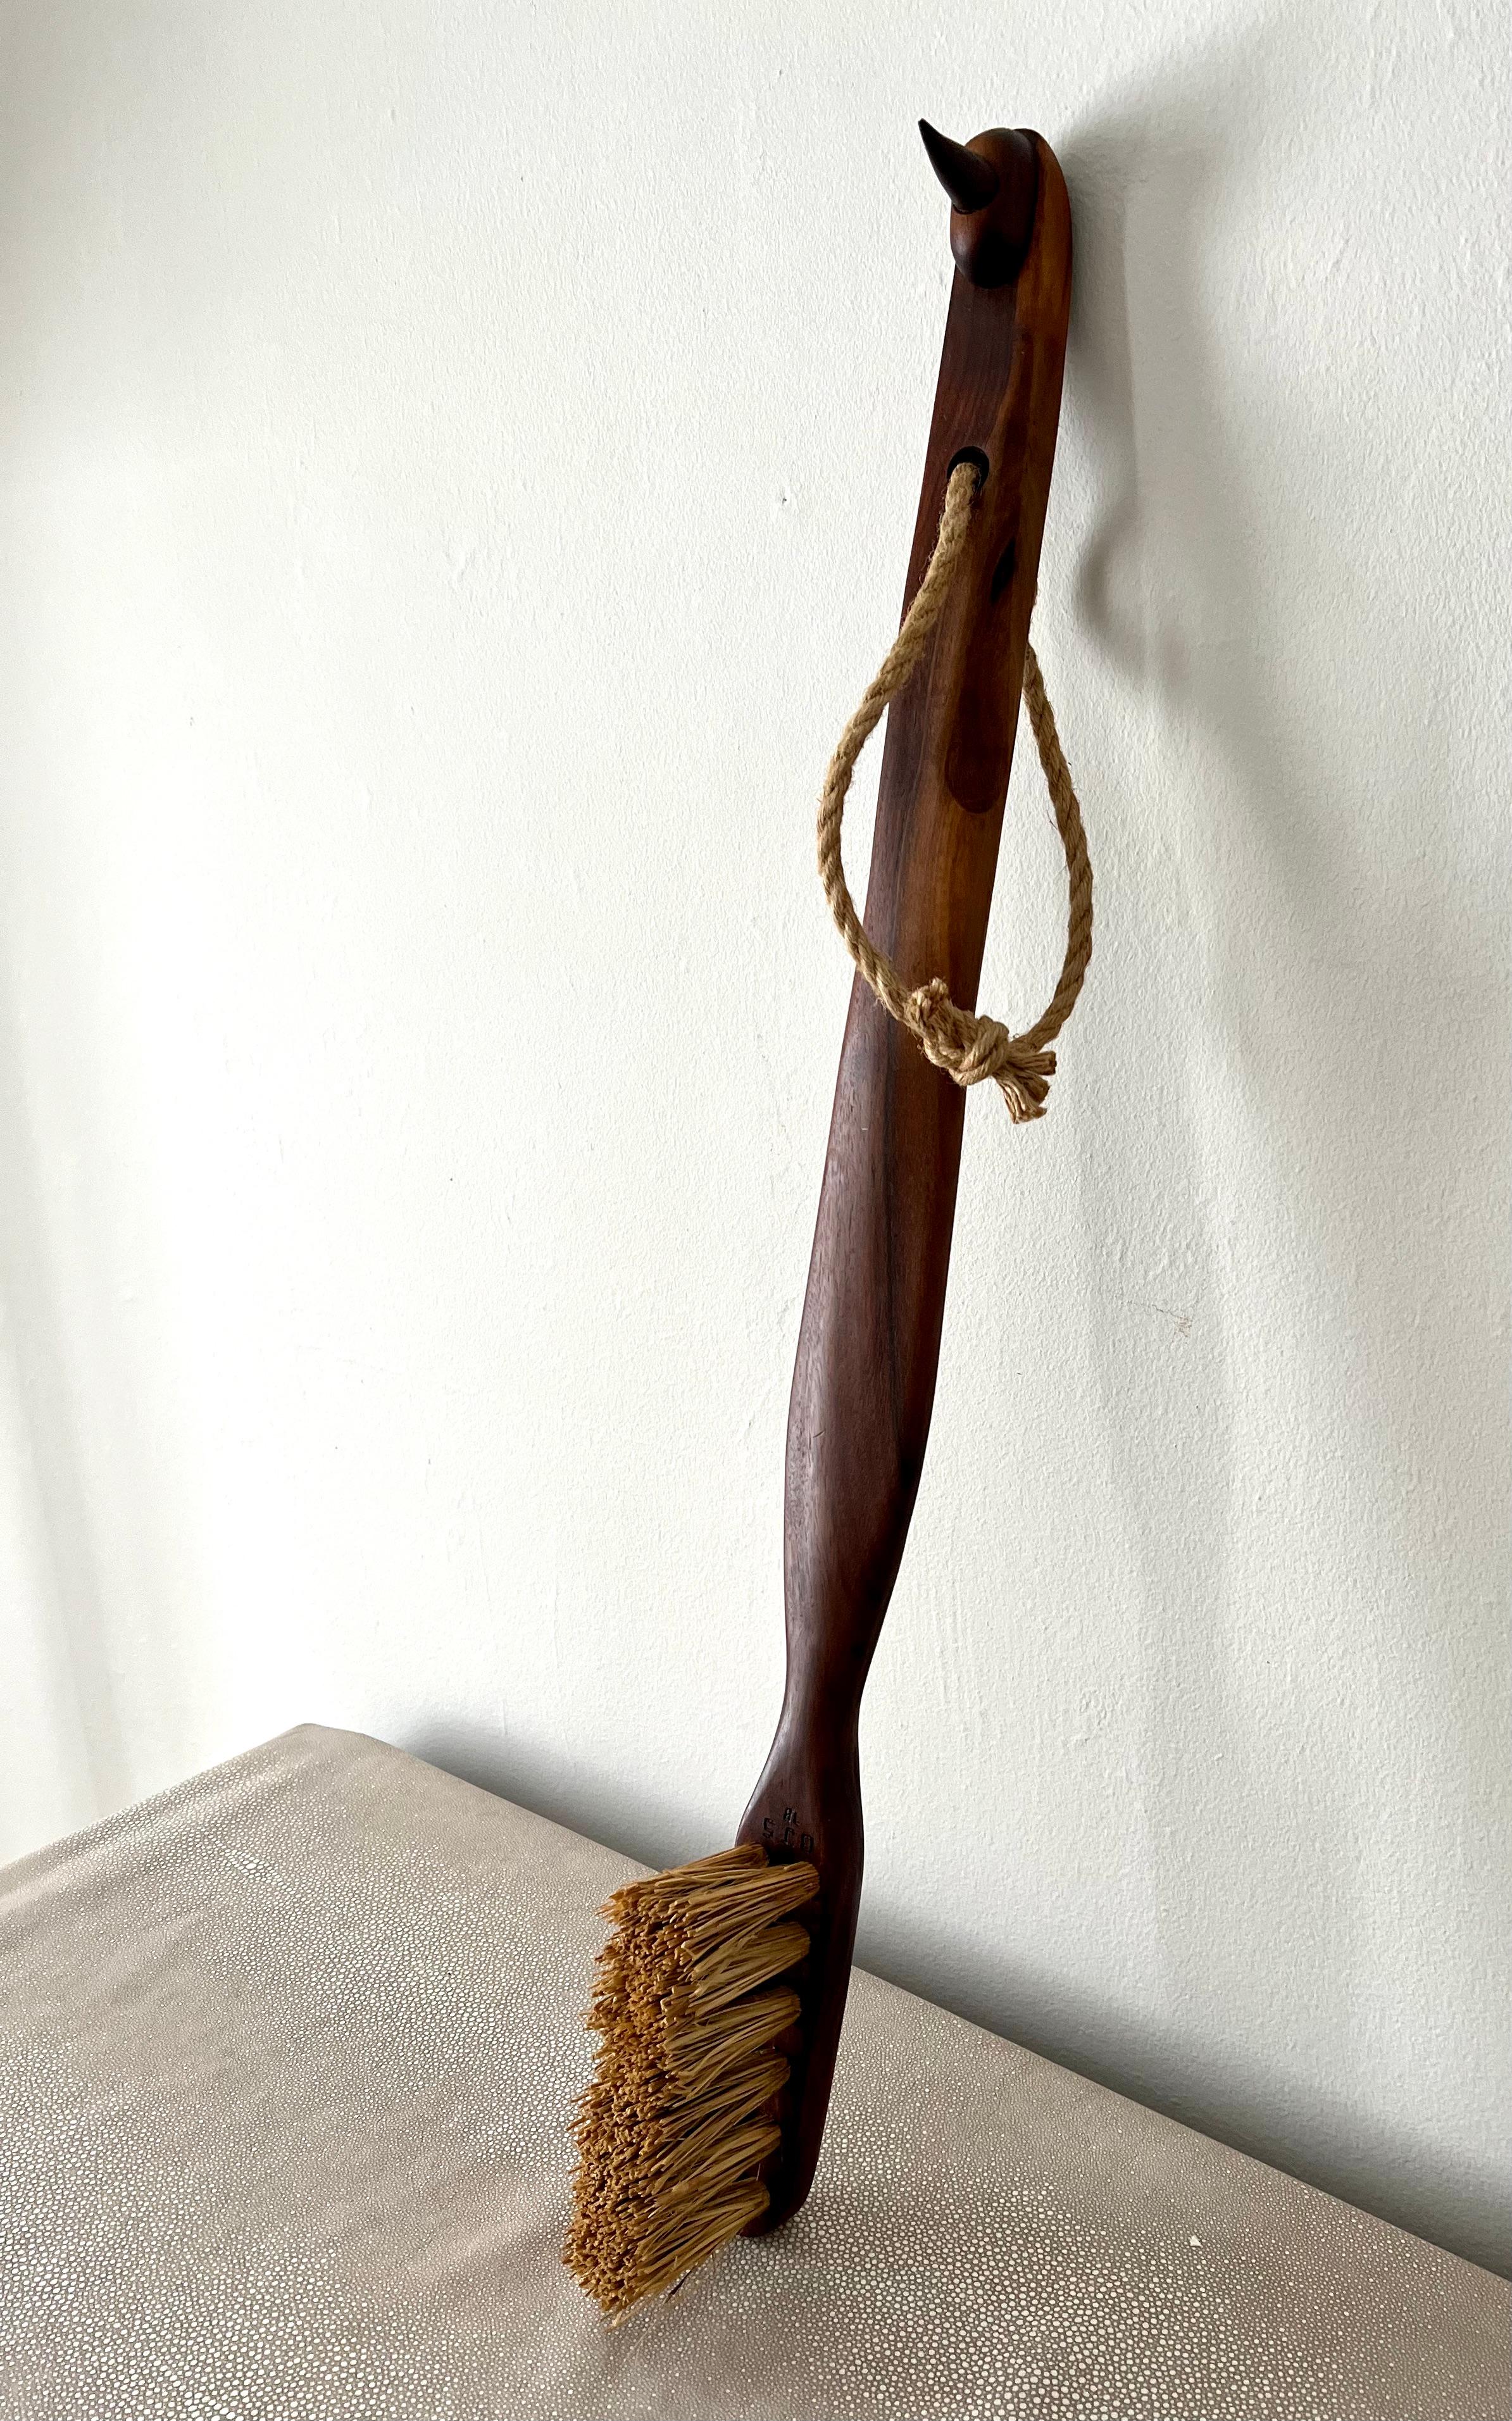 Folkart Hand Carved Oversized Wooden Toothbrush with Rope For Sale 2